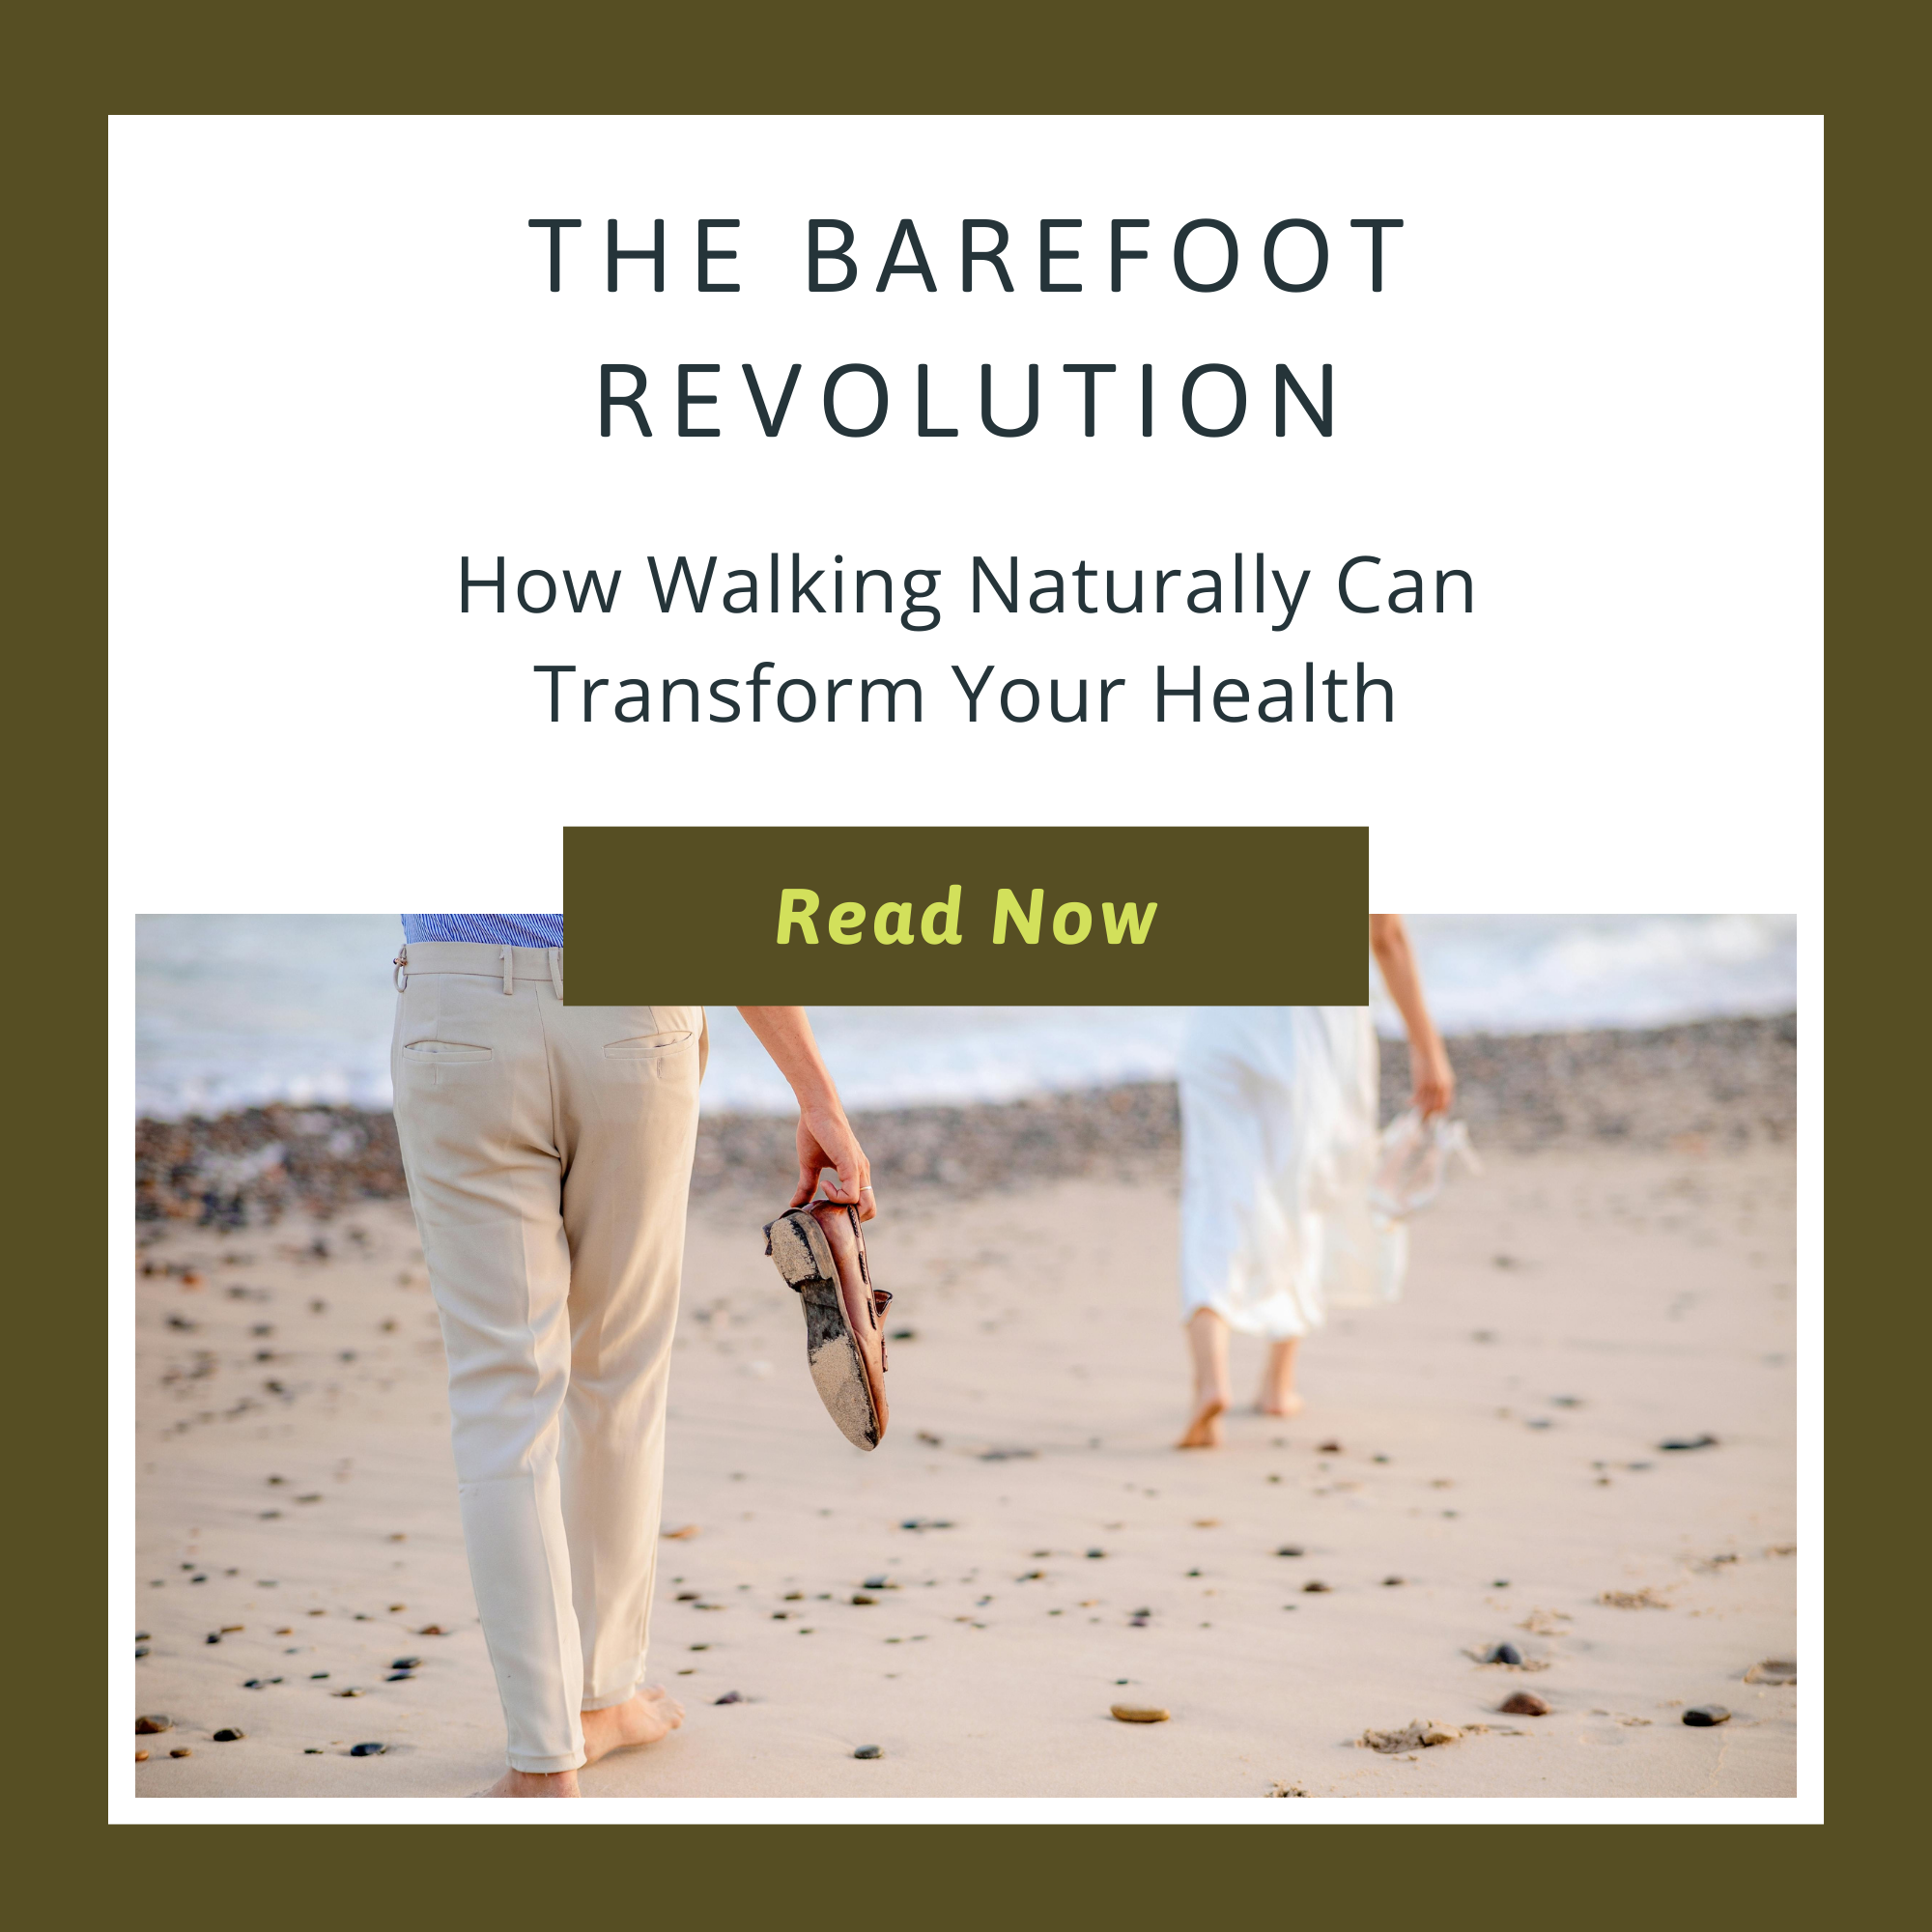 The Barefoot Revolution: How Walking Naturally Can Transform Your Health